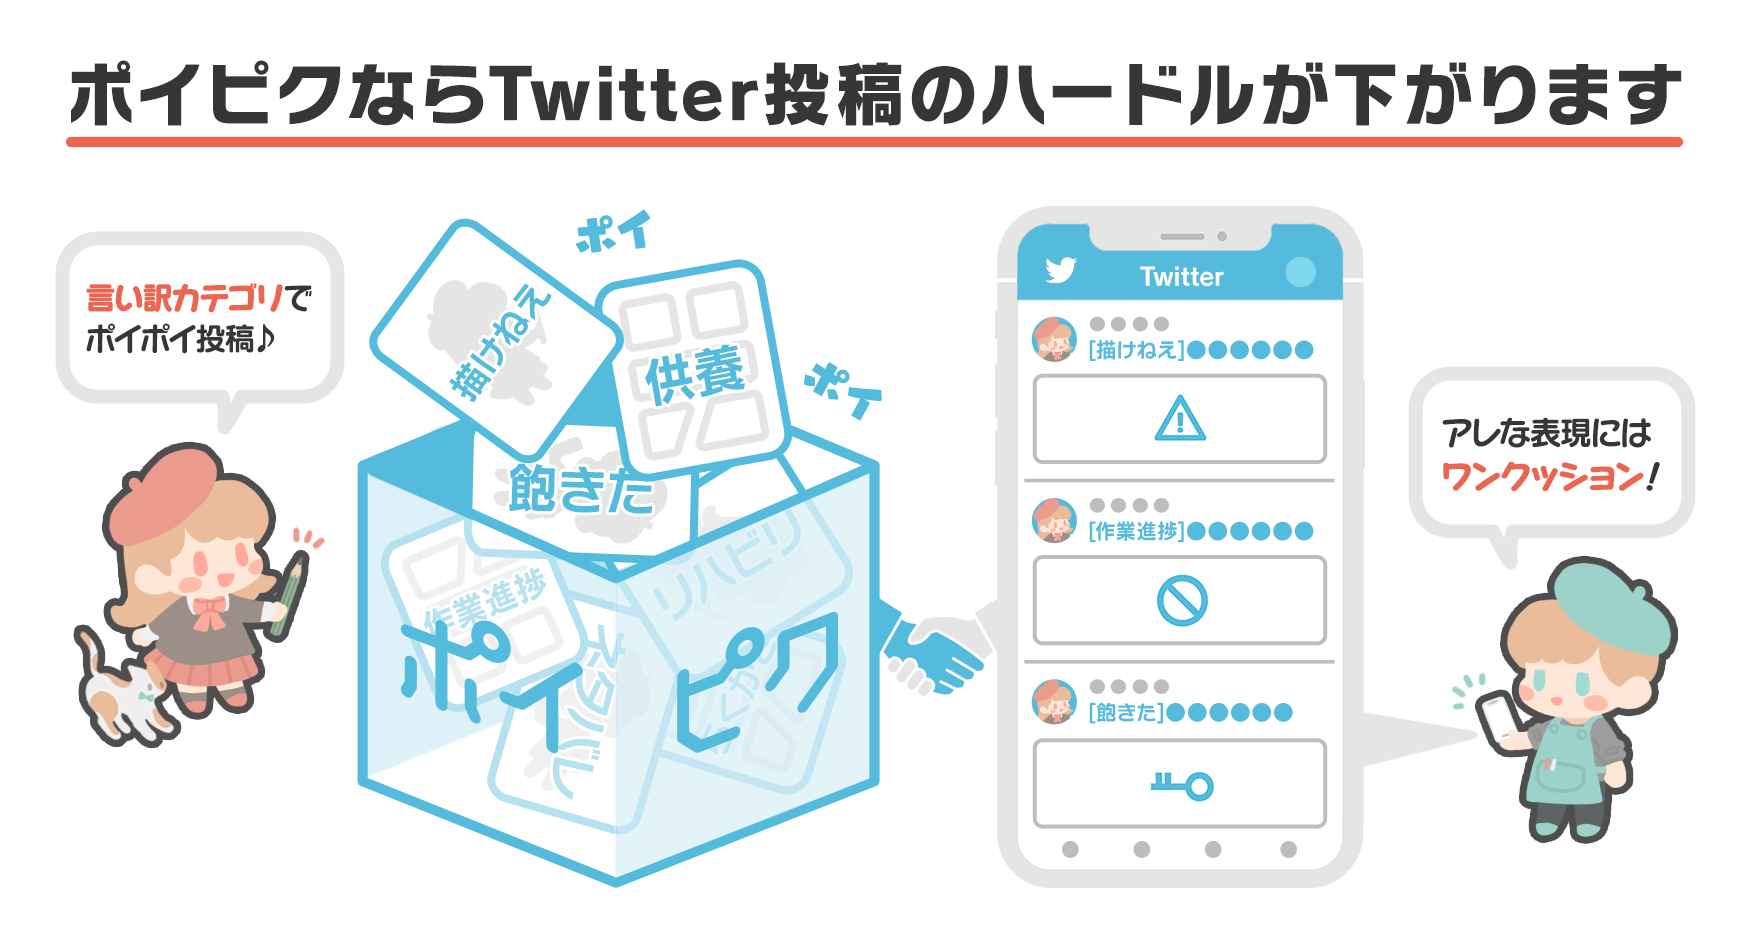 With POIPIKU, you can easily post on Twitter.